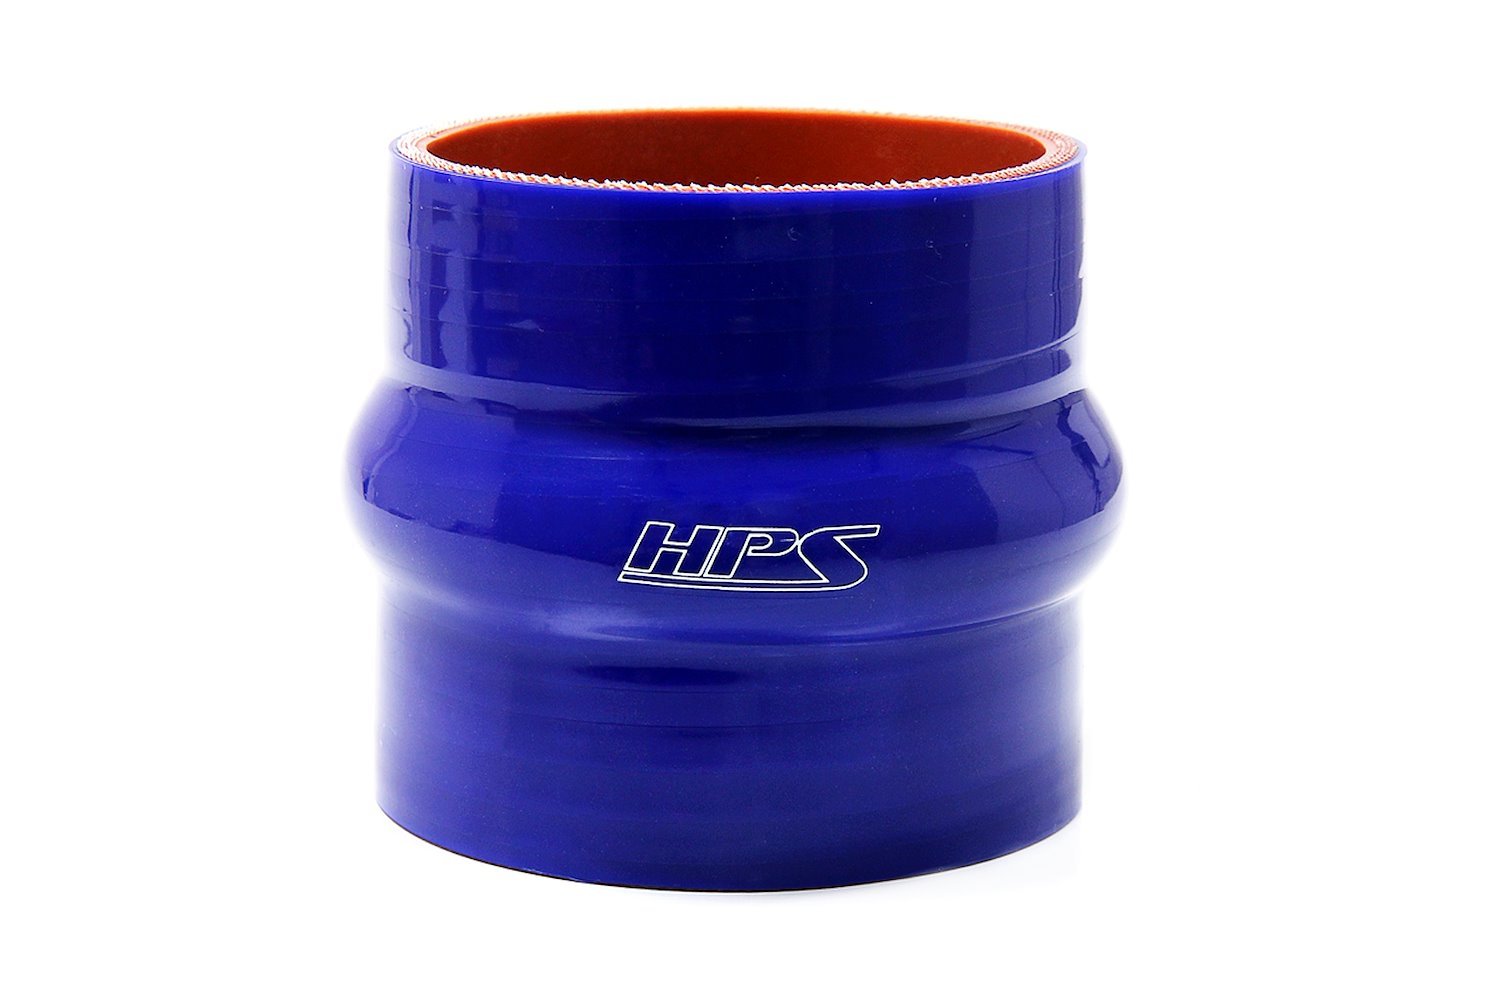 HTSHC-087-L6-BLUE Silicone Hump Coupler Hose, High-Temp 4-Ply Reinforced, 7/8 in. ID, 6 in. Long, Blue